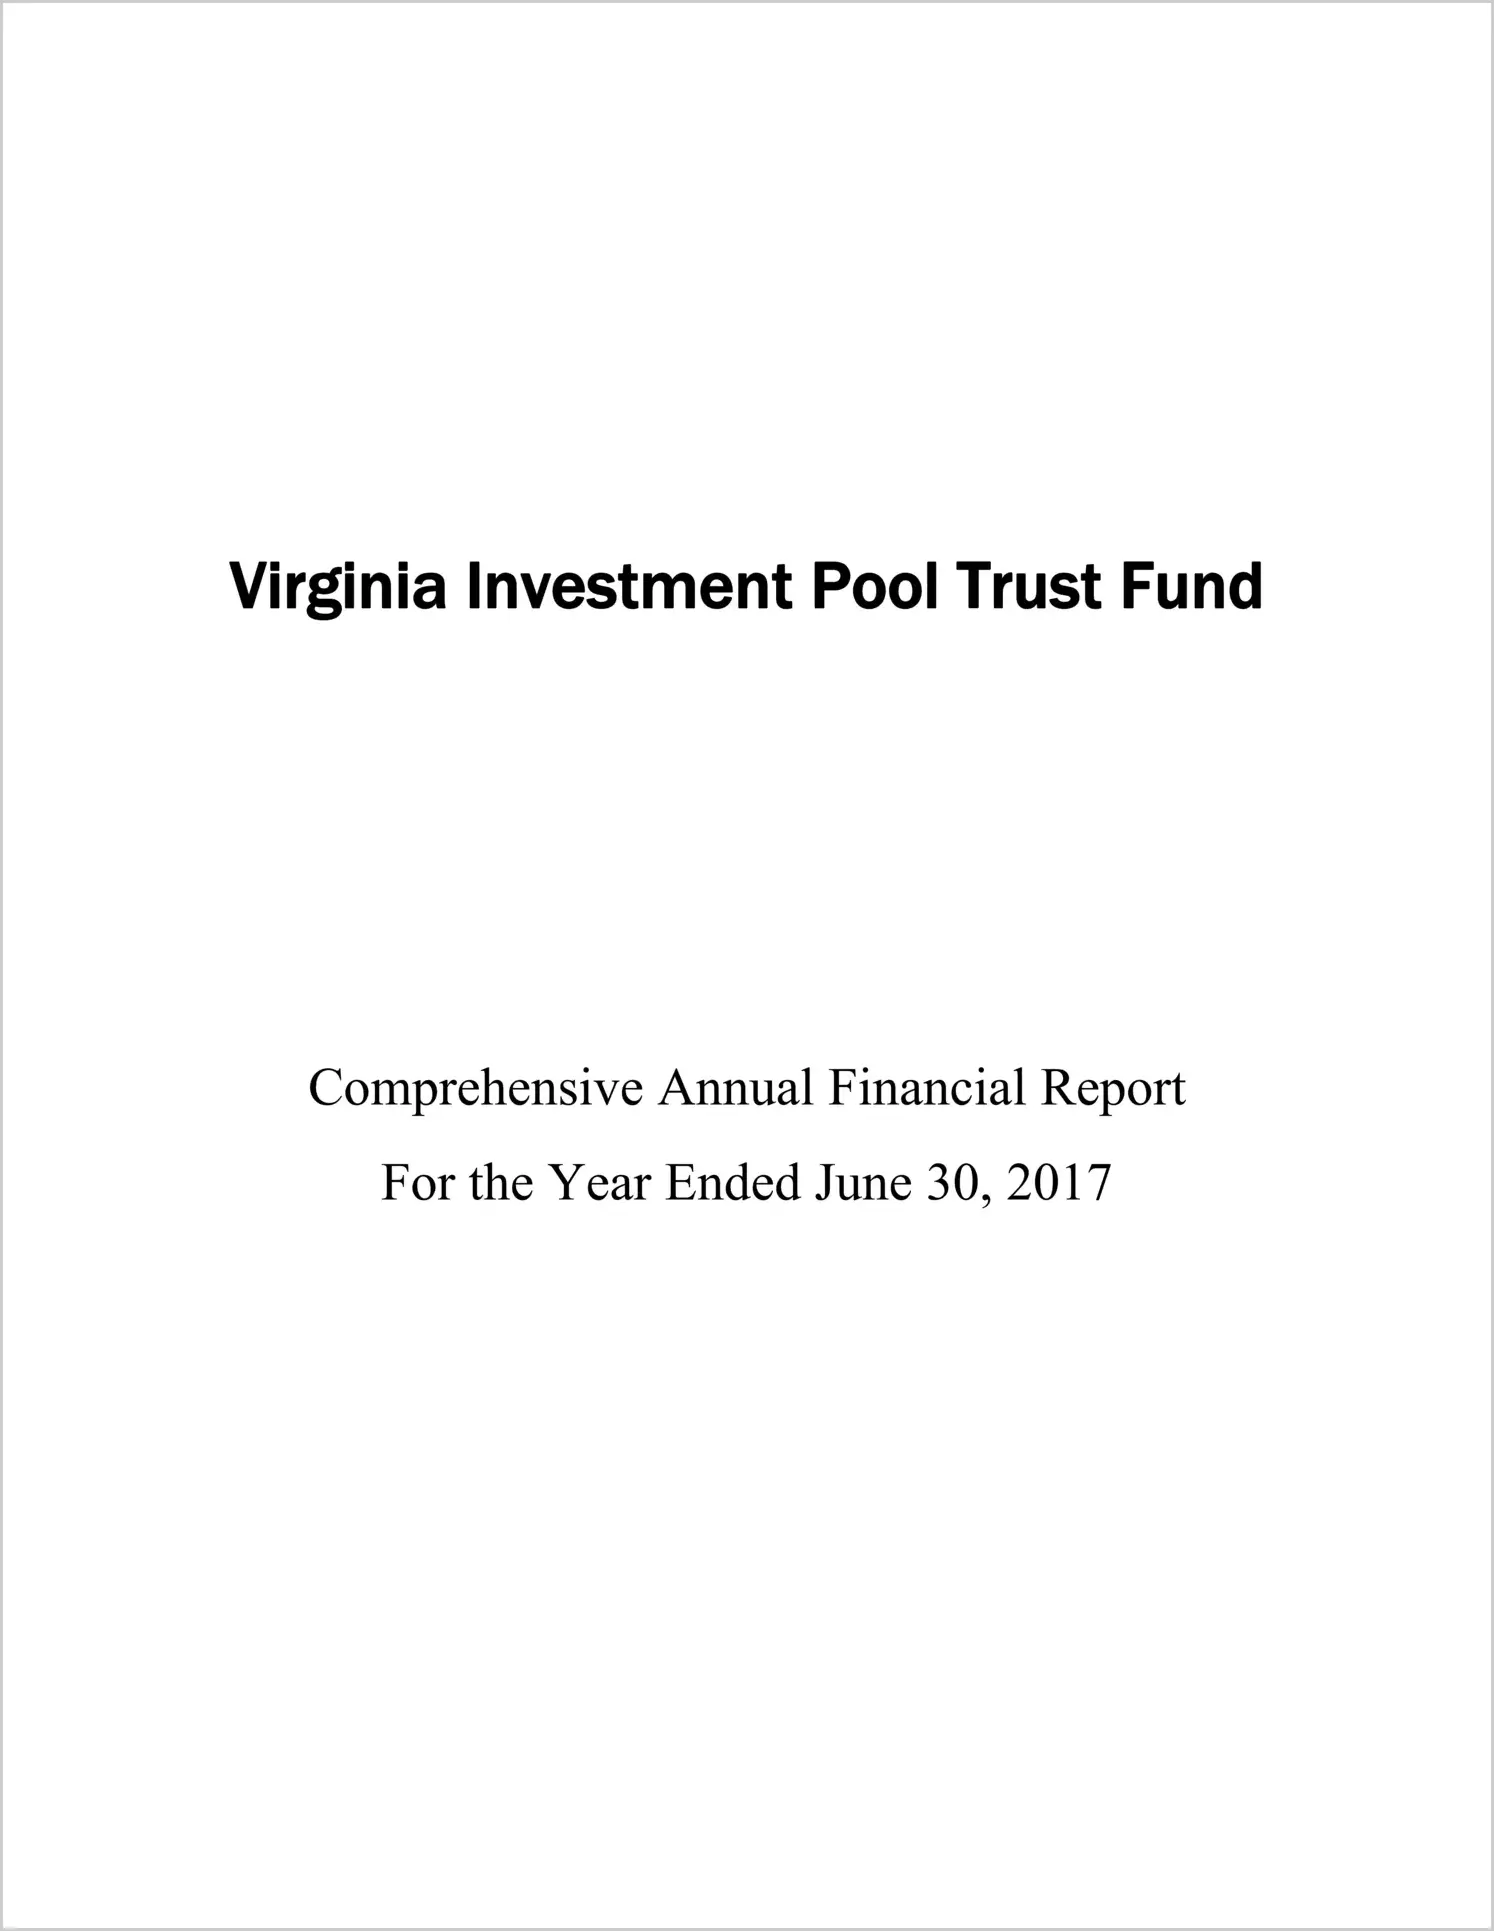 2017 ABC/Other Annual Financial Report  for Virginia Investment Pool Trust Fund